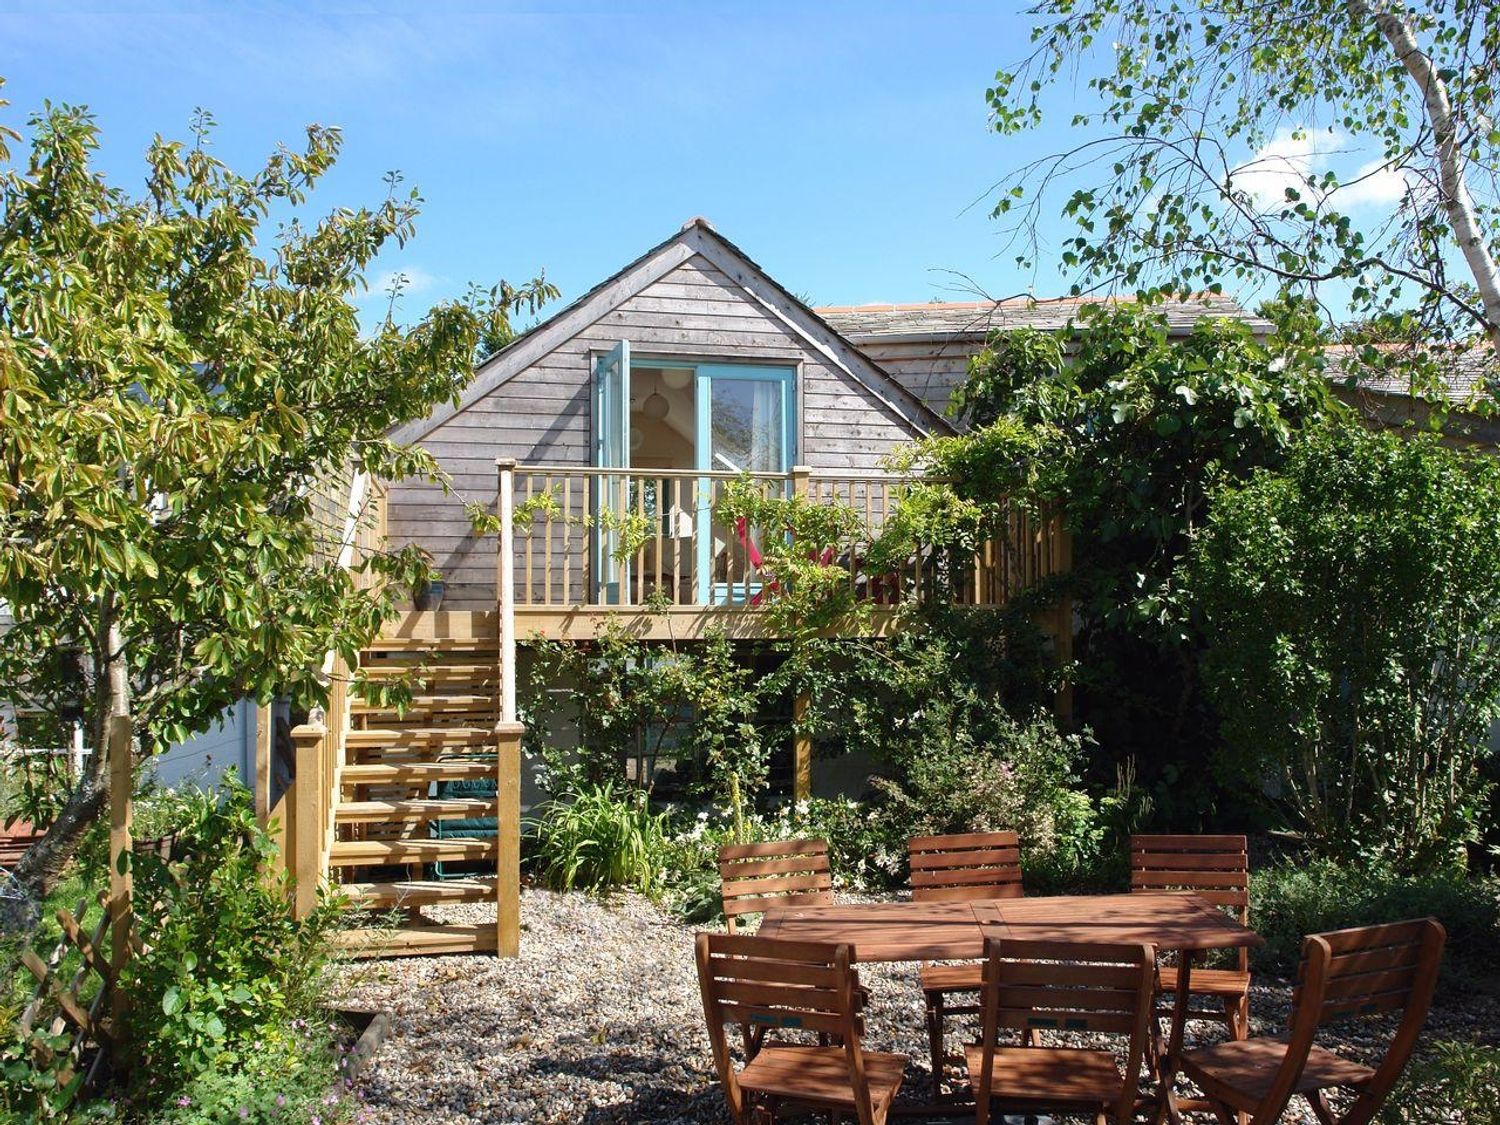 Figtree Cottage - Cornwall - 976334 - photo 1